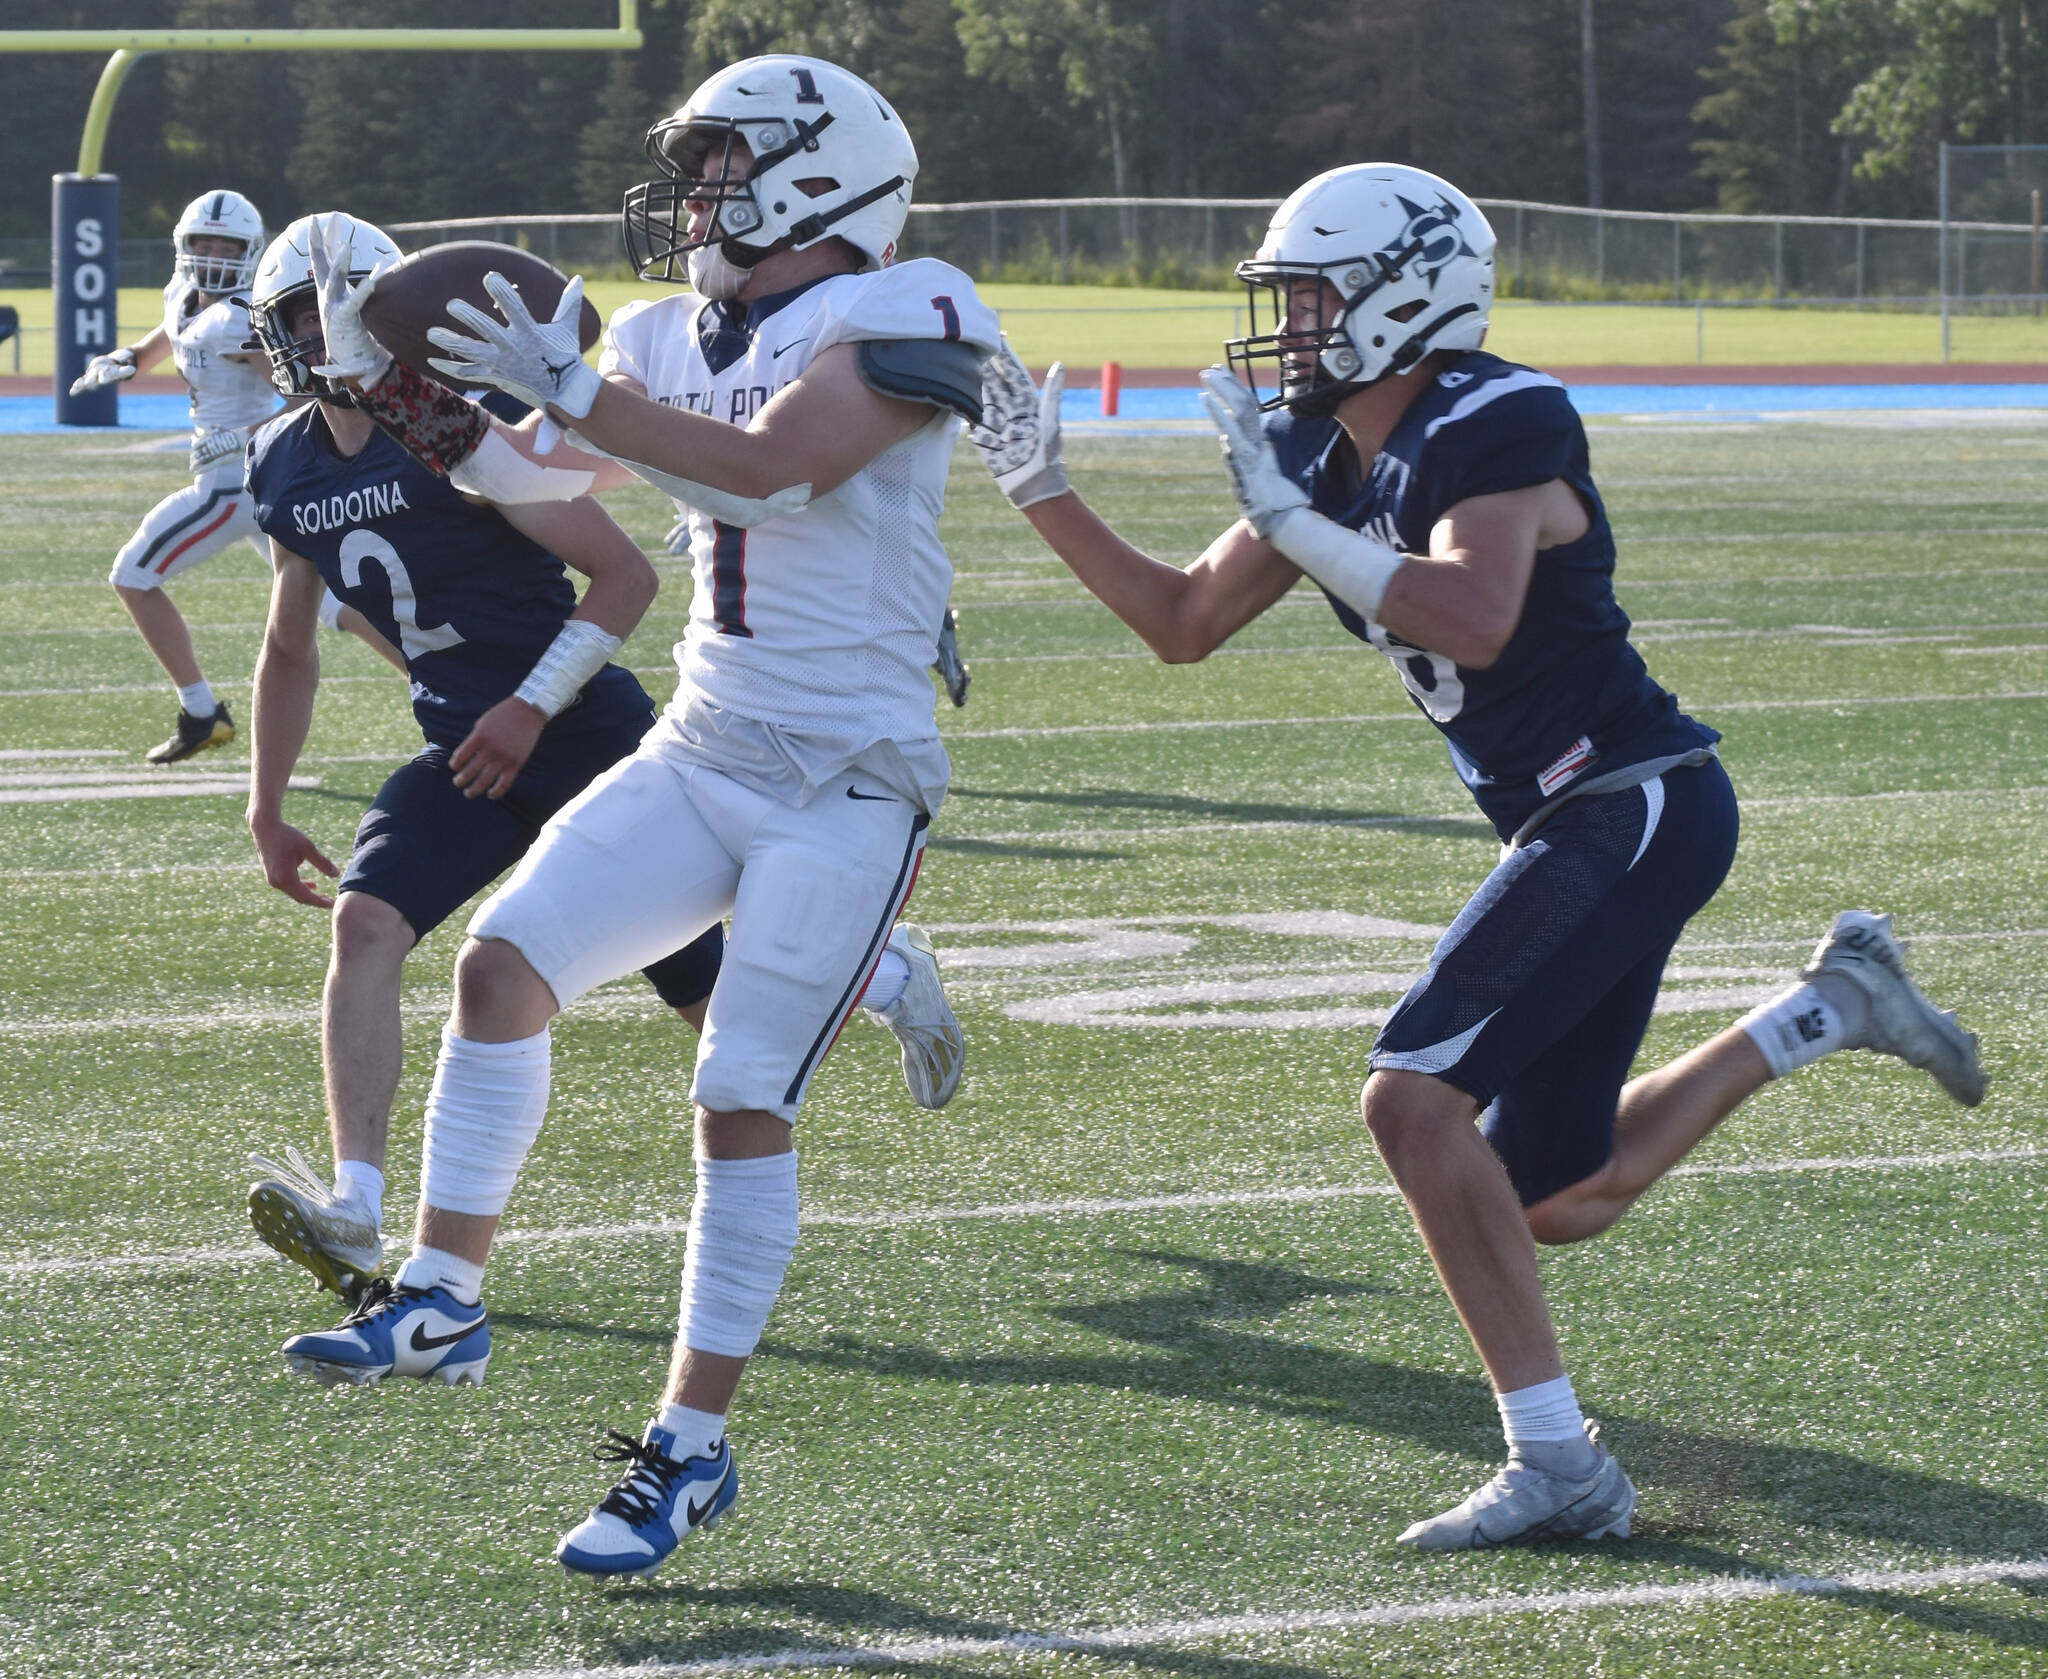 North Pole’s Izak D’Hondt catches a pass in front of Soldotna defenders Leigh Tacey and Trevor Michael on Friday, Aug. 18, 2023, at Justin Maile Field at Soldotna High School in Soldotna, Alaska. (Photo by Jeff Helminiak/Peninsula Clarion)